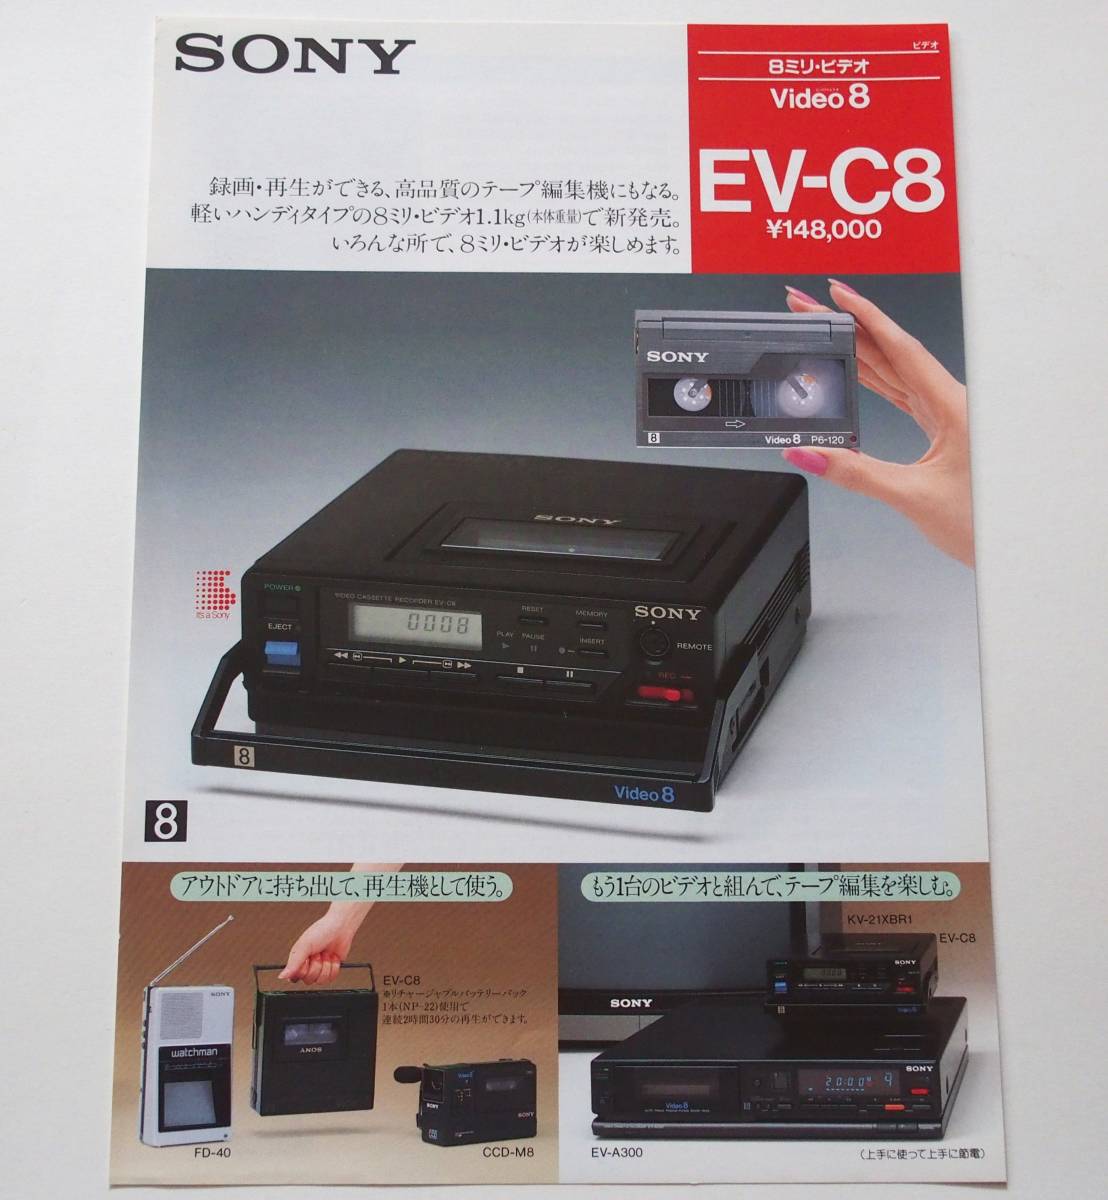 [ catalog 2 part set ][SONY 8 millimeter video Video8 CCD-M8 catalog ]/[SONY 8 millimeter video Video8 EV-C8 catalog ](1985 year 9 month )